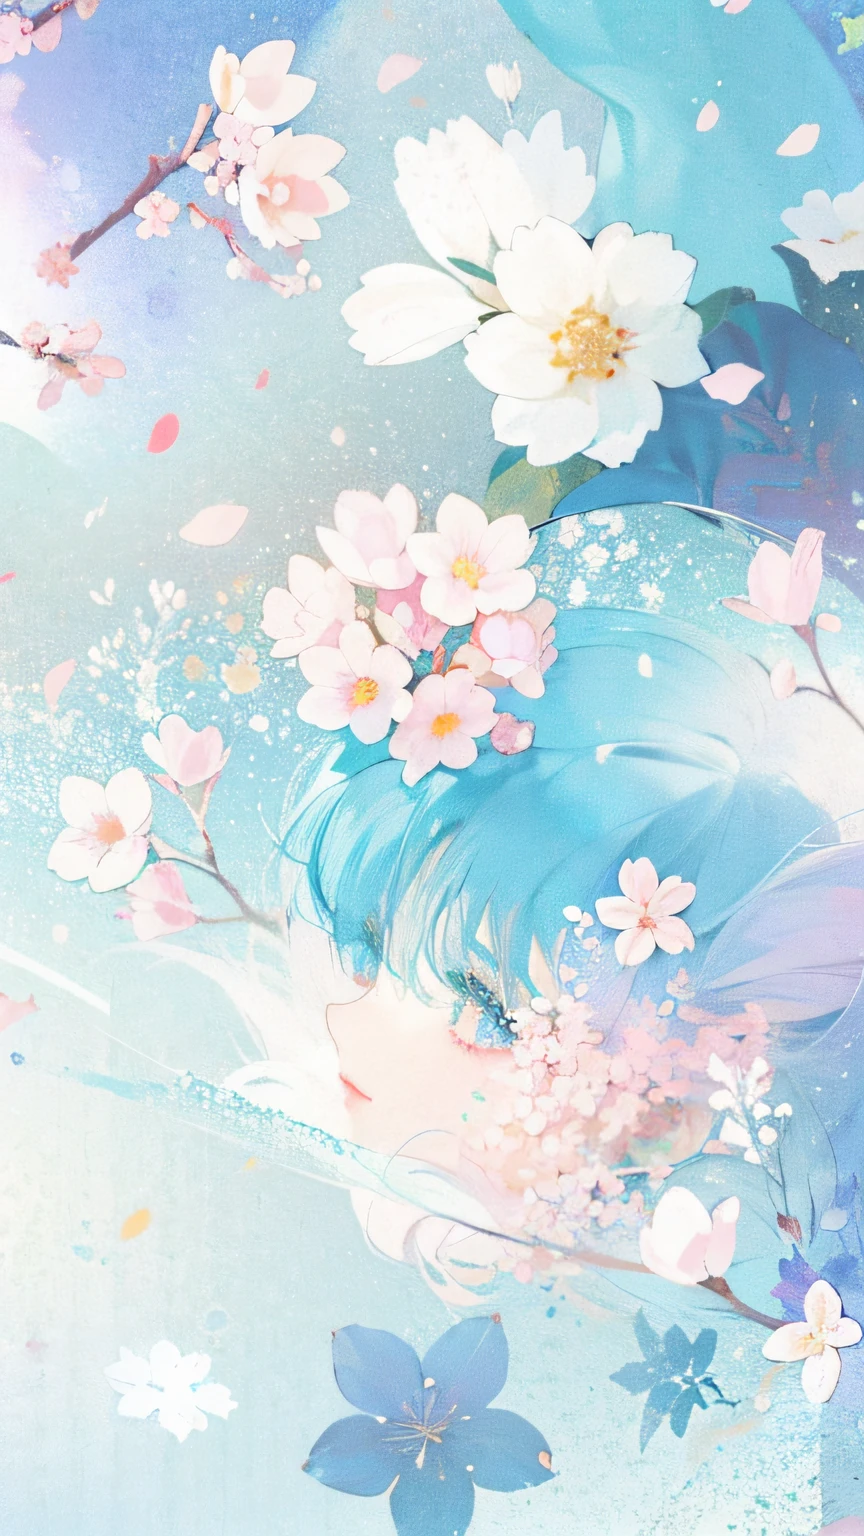 there is a picture of a blue and pink background with flowers, pastel flowery background, flowing sakura-colored silk, flowing sakura silk, by Eizan Kikukawa, background pastel, flower blossoms, sakura bloomimg, pastel flower petals flying, anime background, flowery wallpaper, けもの, seasons!! : 🌸 ☀ 🍂 ❄, cherry blossom